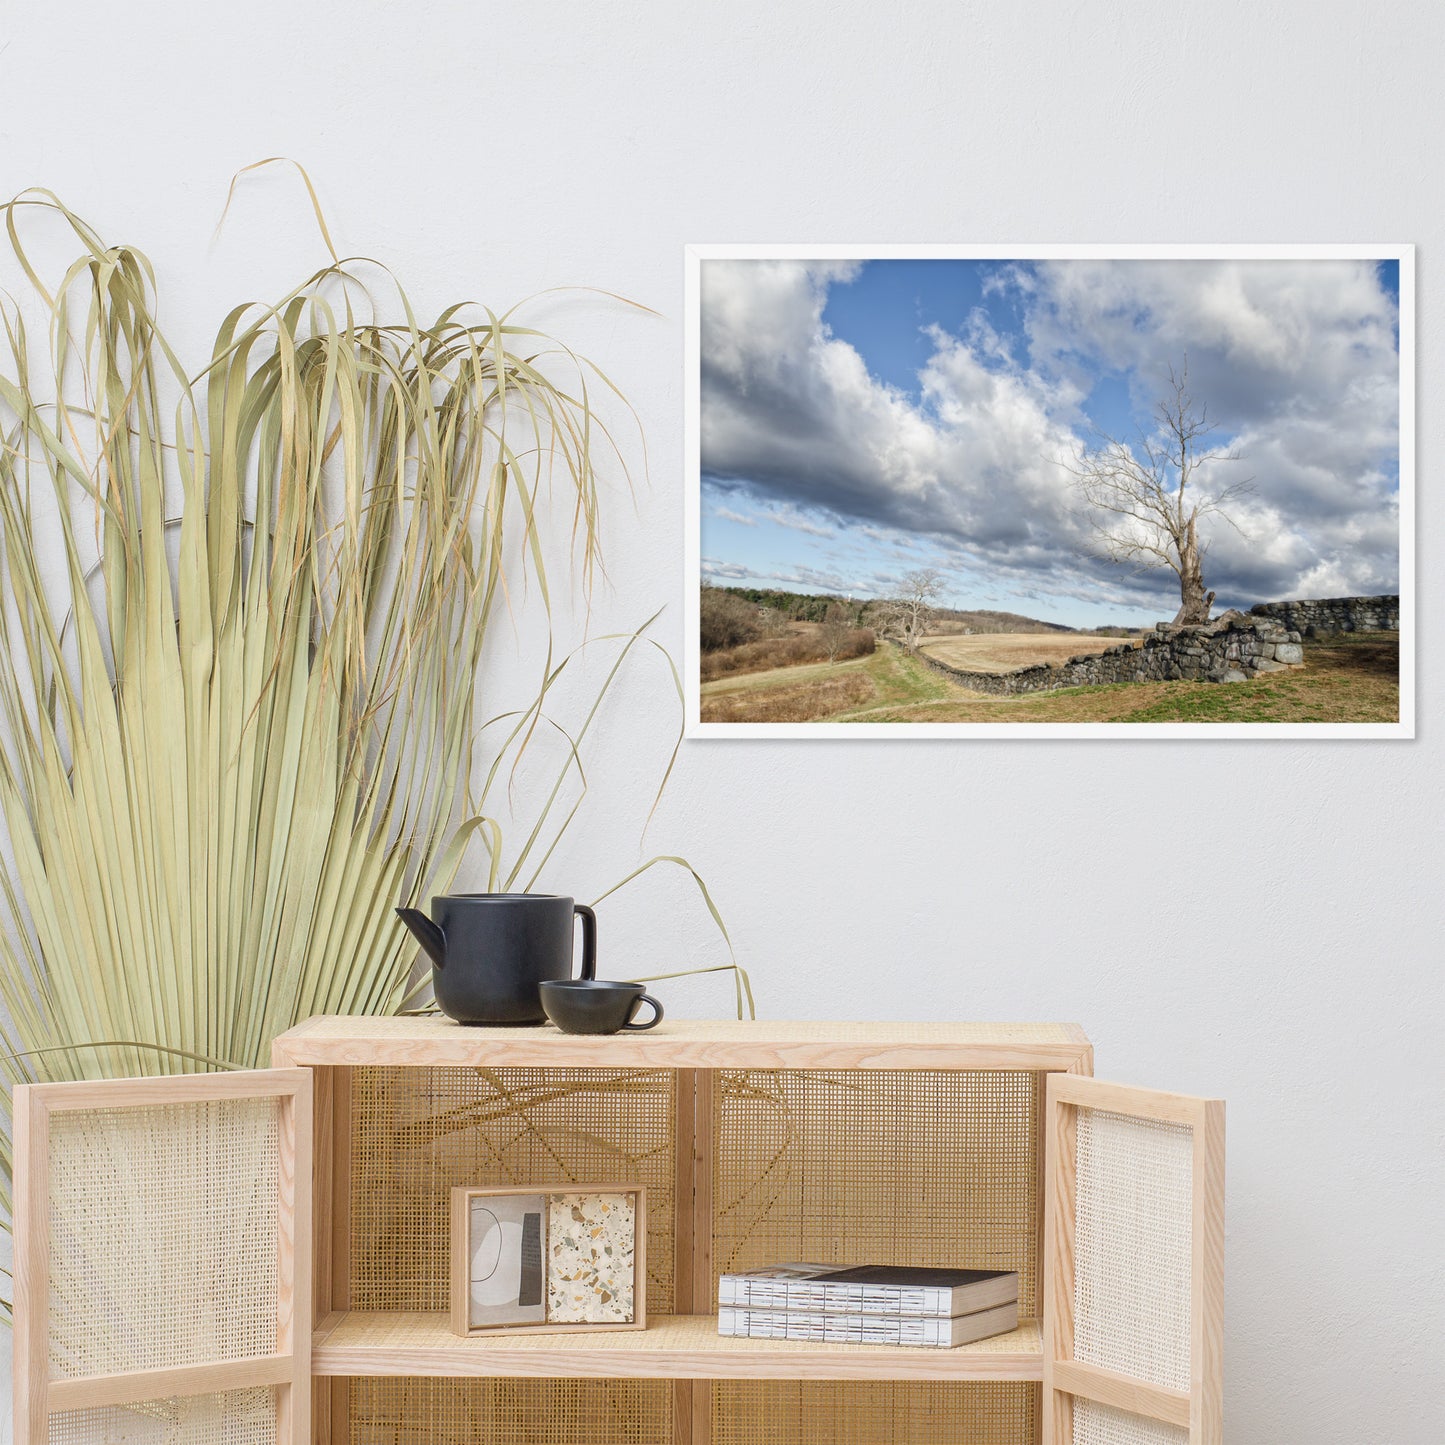 Dead Tree and Stone Wall - Color Framed Photo Paper Wall Art Prints